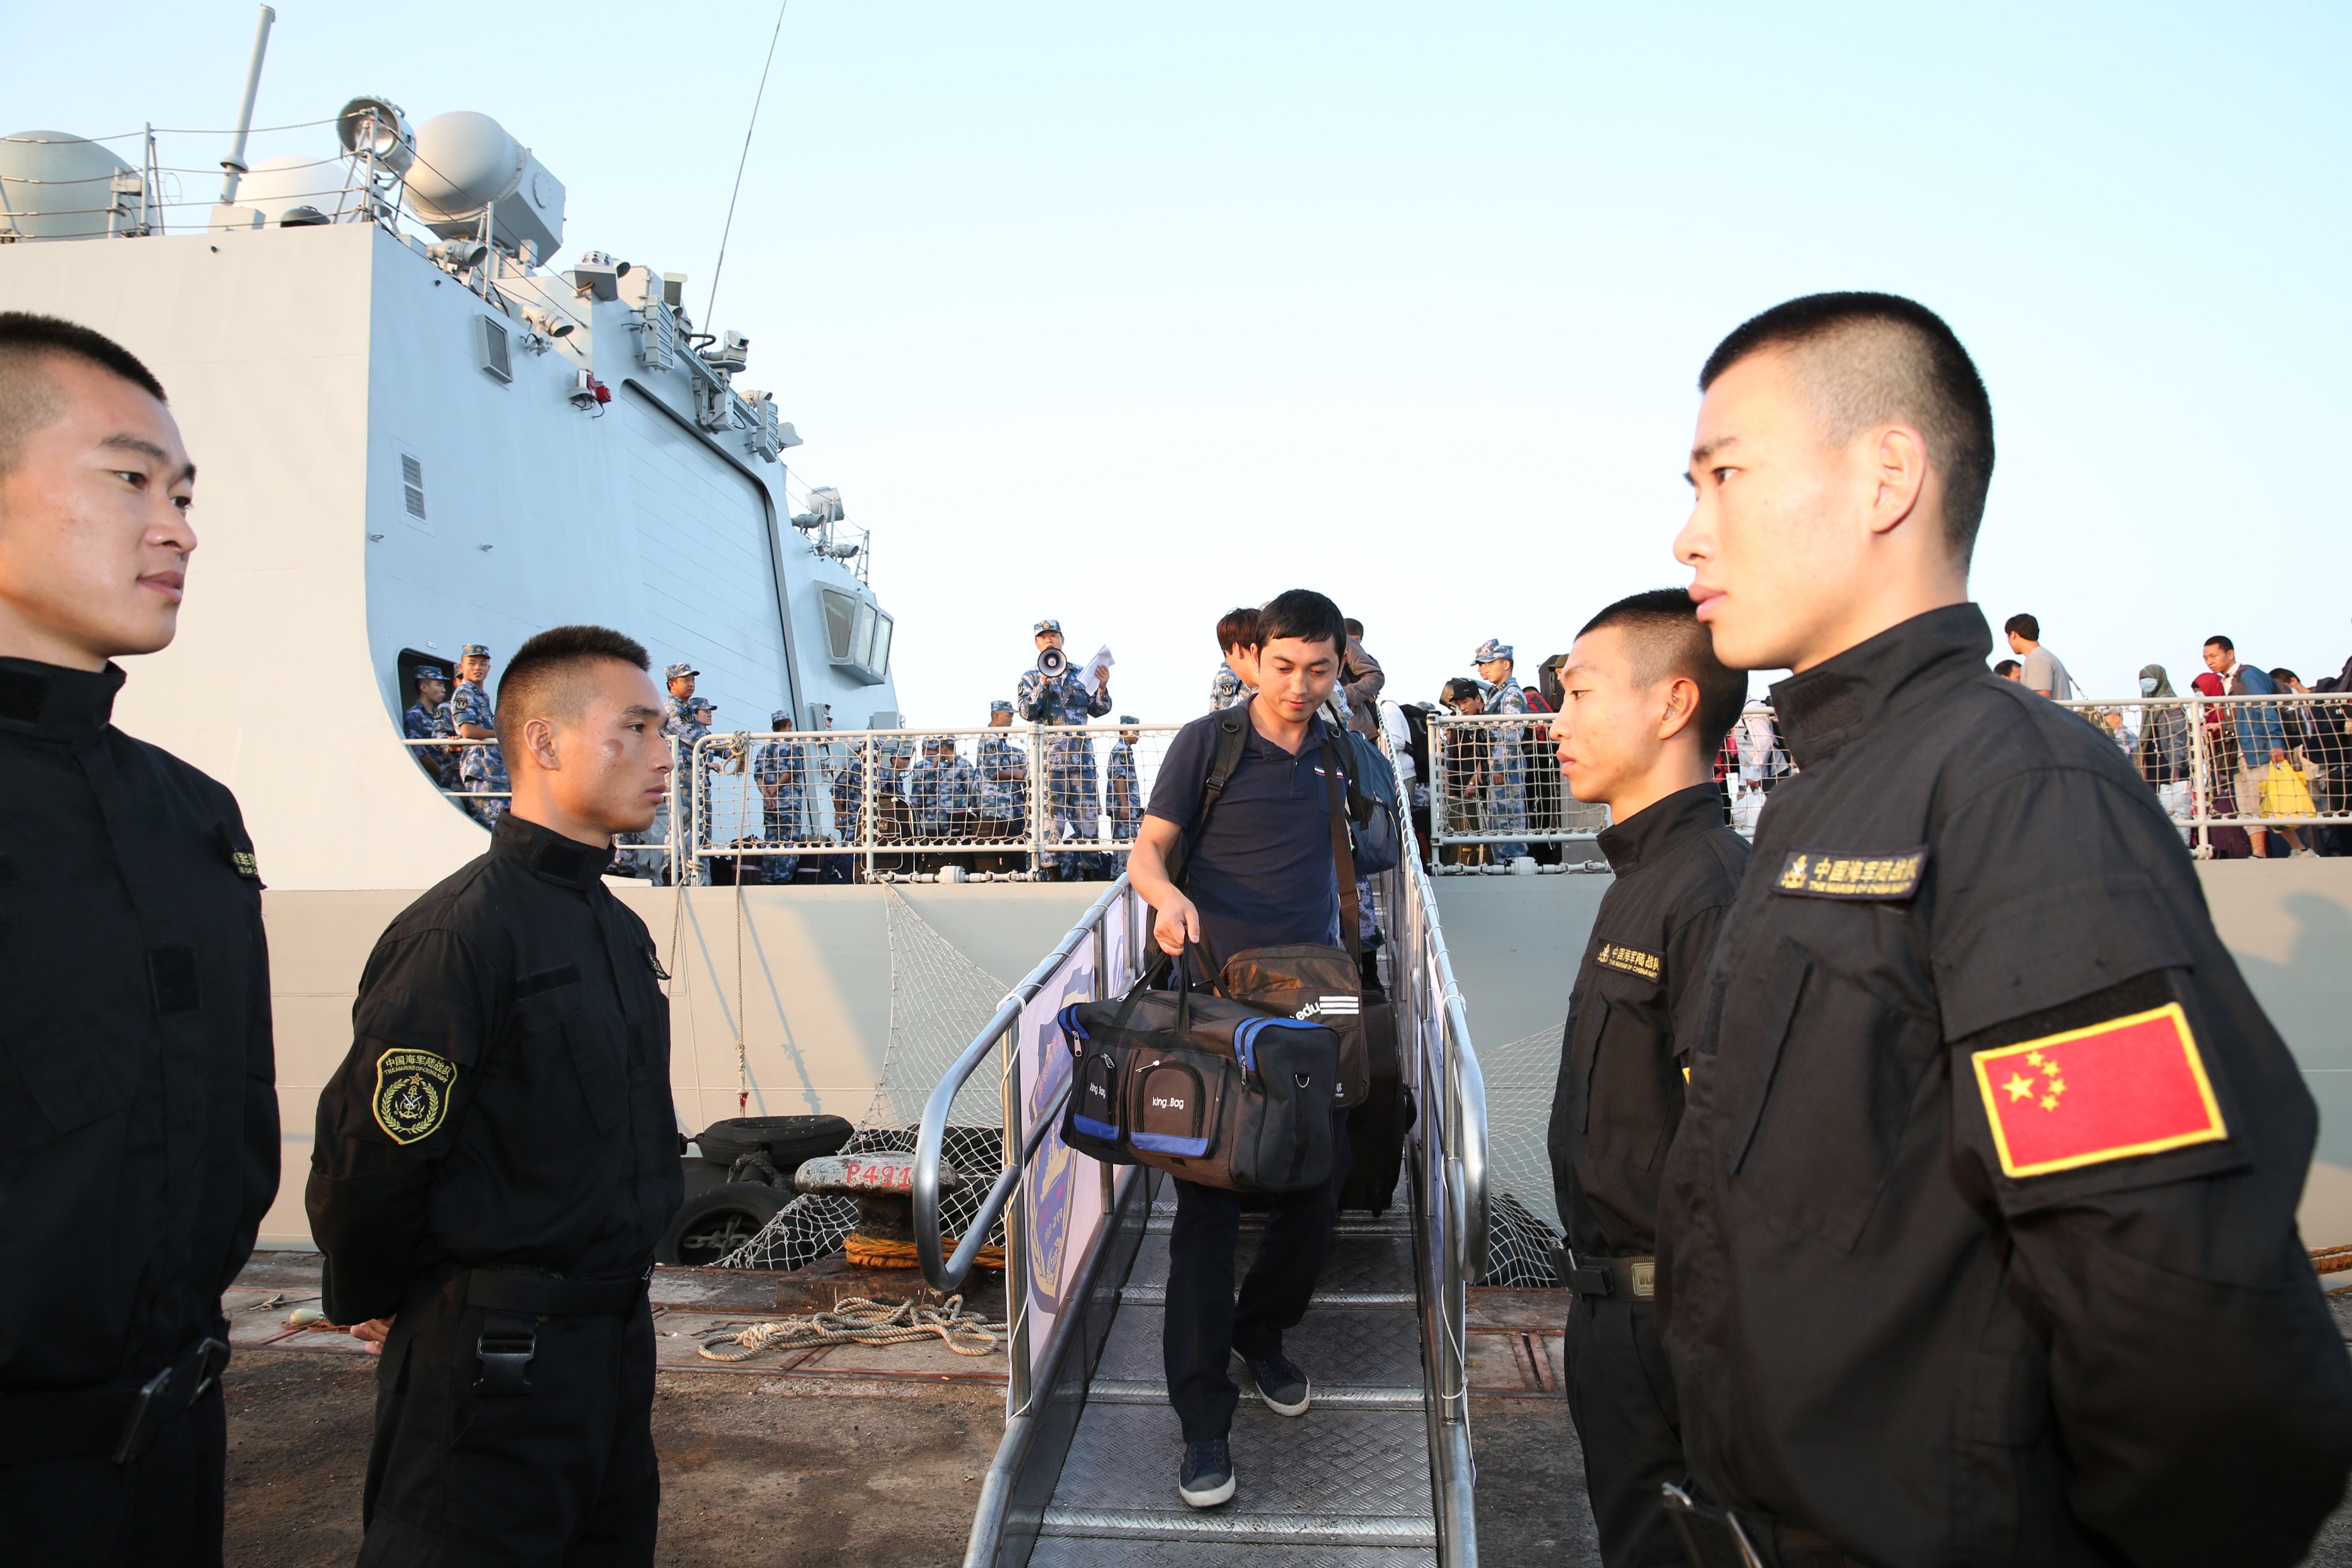 (150331) -- DJIBOUTI, March 31, 2015 (Xinhua) -- Chinese evacuees arrive in Djibouti, March 31, 2015. More than 500 Chinese evacuees from conflict-ridden Yemen have arrived at the Djibouti port as the situation continues to deteriorate in Yemen. (Xinhua/Pan Siwei) (lyi)